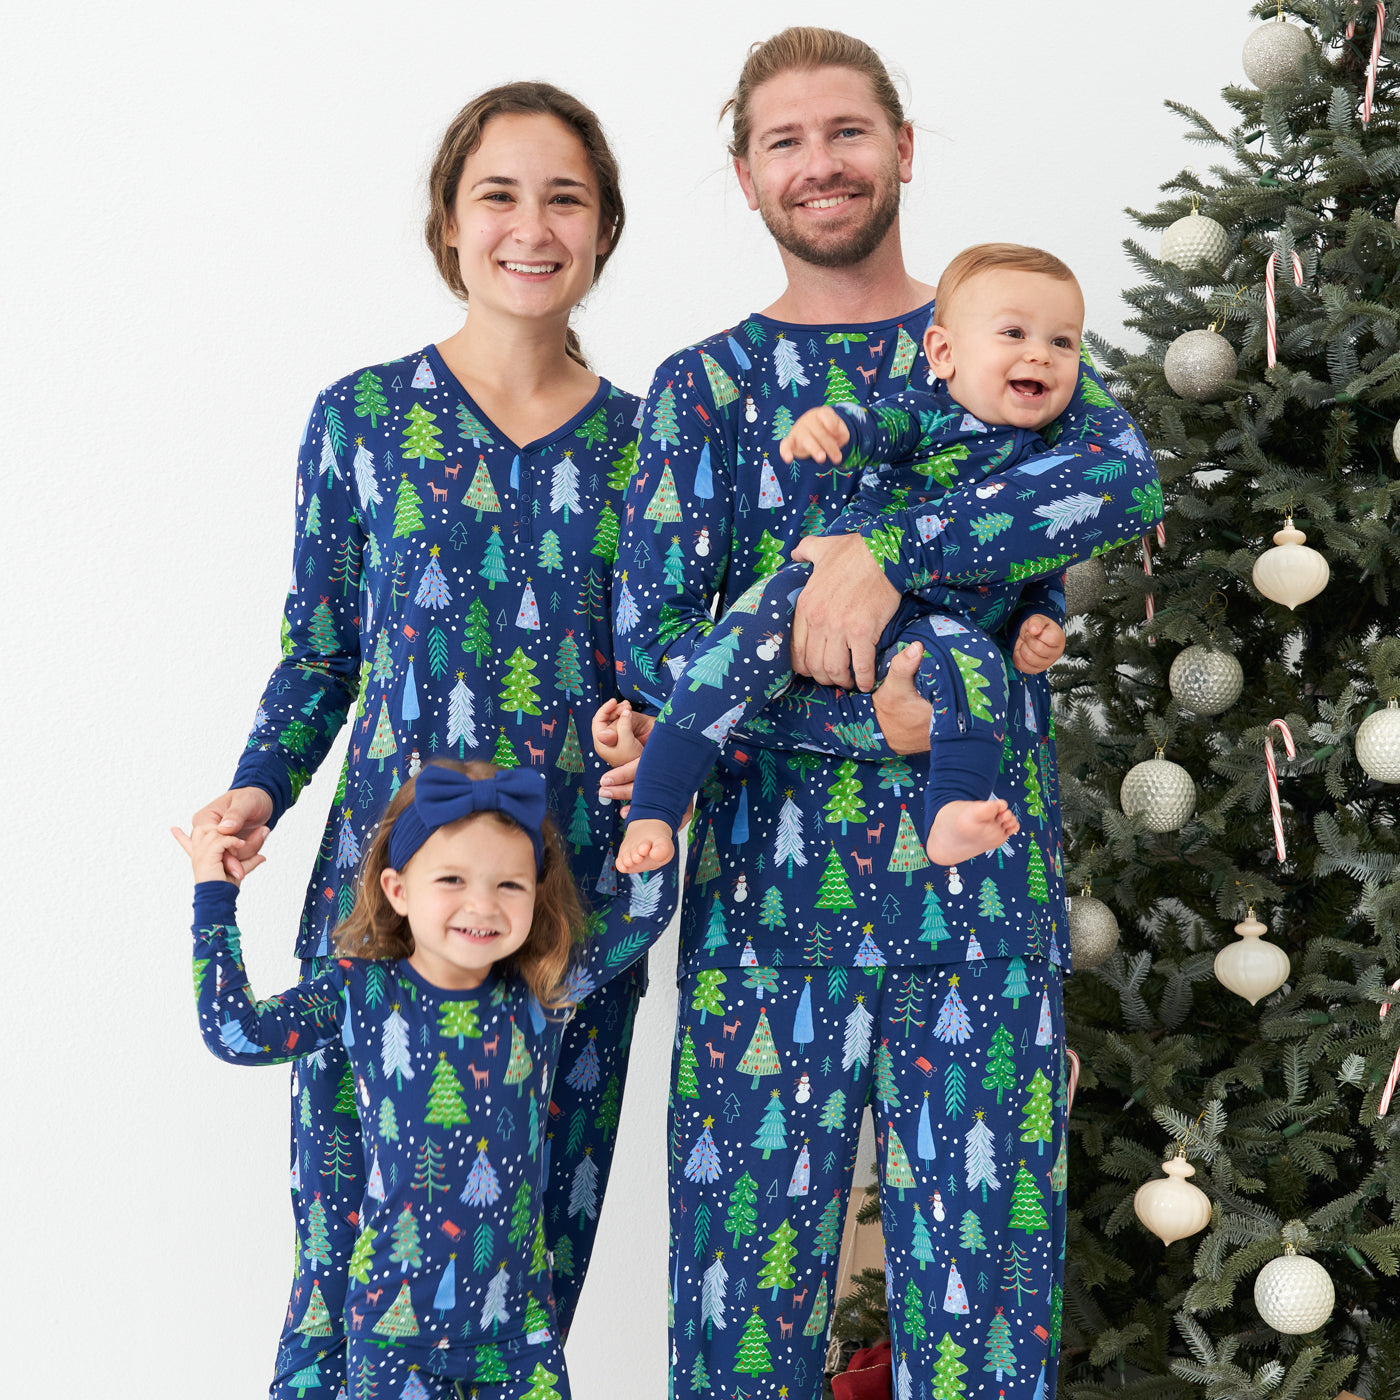 Family of four posing together wearing matching pajamas. Dad is wearing men's Blue Merry and Bright pajama bottoms paired with a matching Blue Merry and Bright pajama top. Mom is wearing women's Blue Merry and Bright pajama bottoms and a matching women's Blue Merry and Bright pajama top. Their kids are wearing a Blue Merry and Bright printed two piece pajama set paired with a Sapphire luxe bow headband and her brother is wearing a Blue Merry and Bright zippy